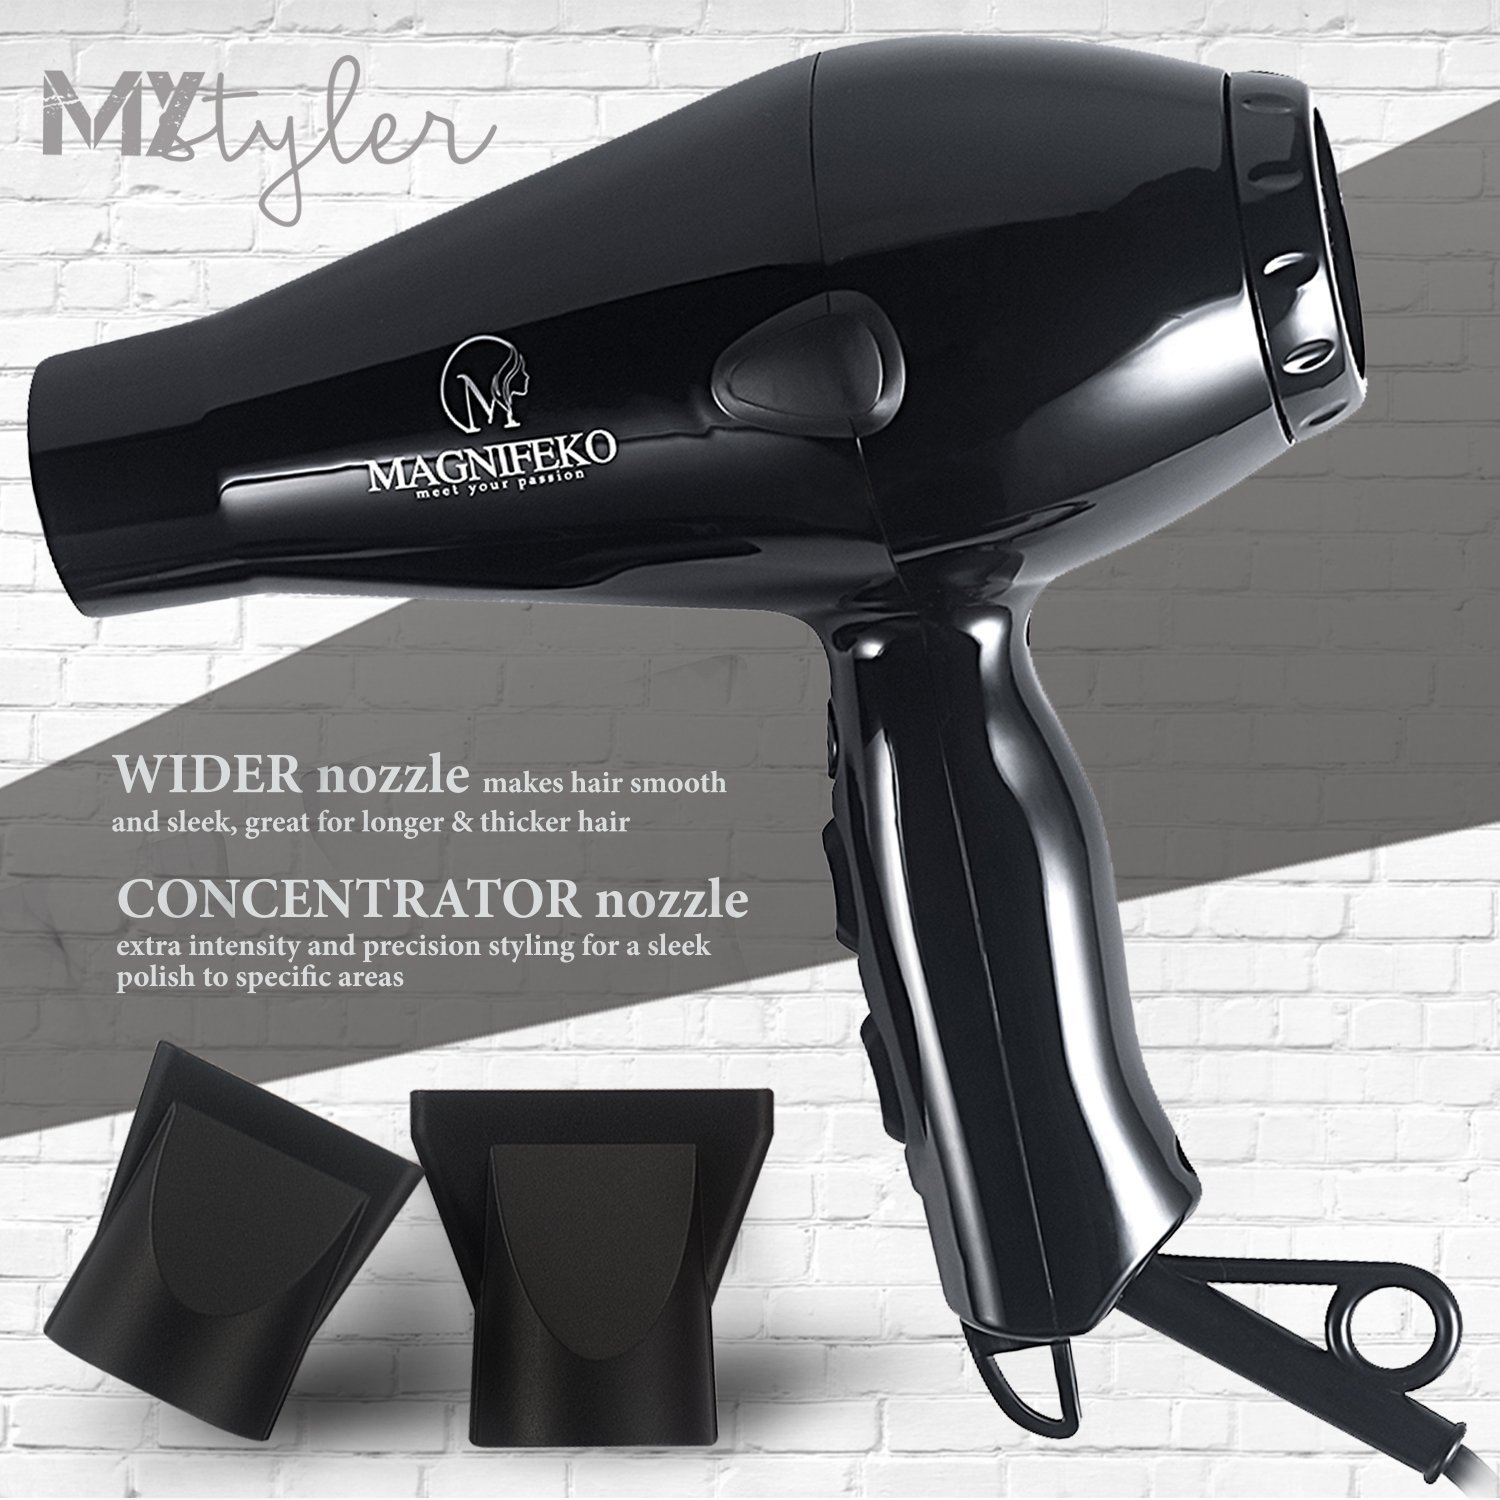 ionic hairdryer Professional Hair Dryer 1875W Blow Dryer Fast Drying for healthy and shiny, non-frizzy hair